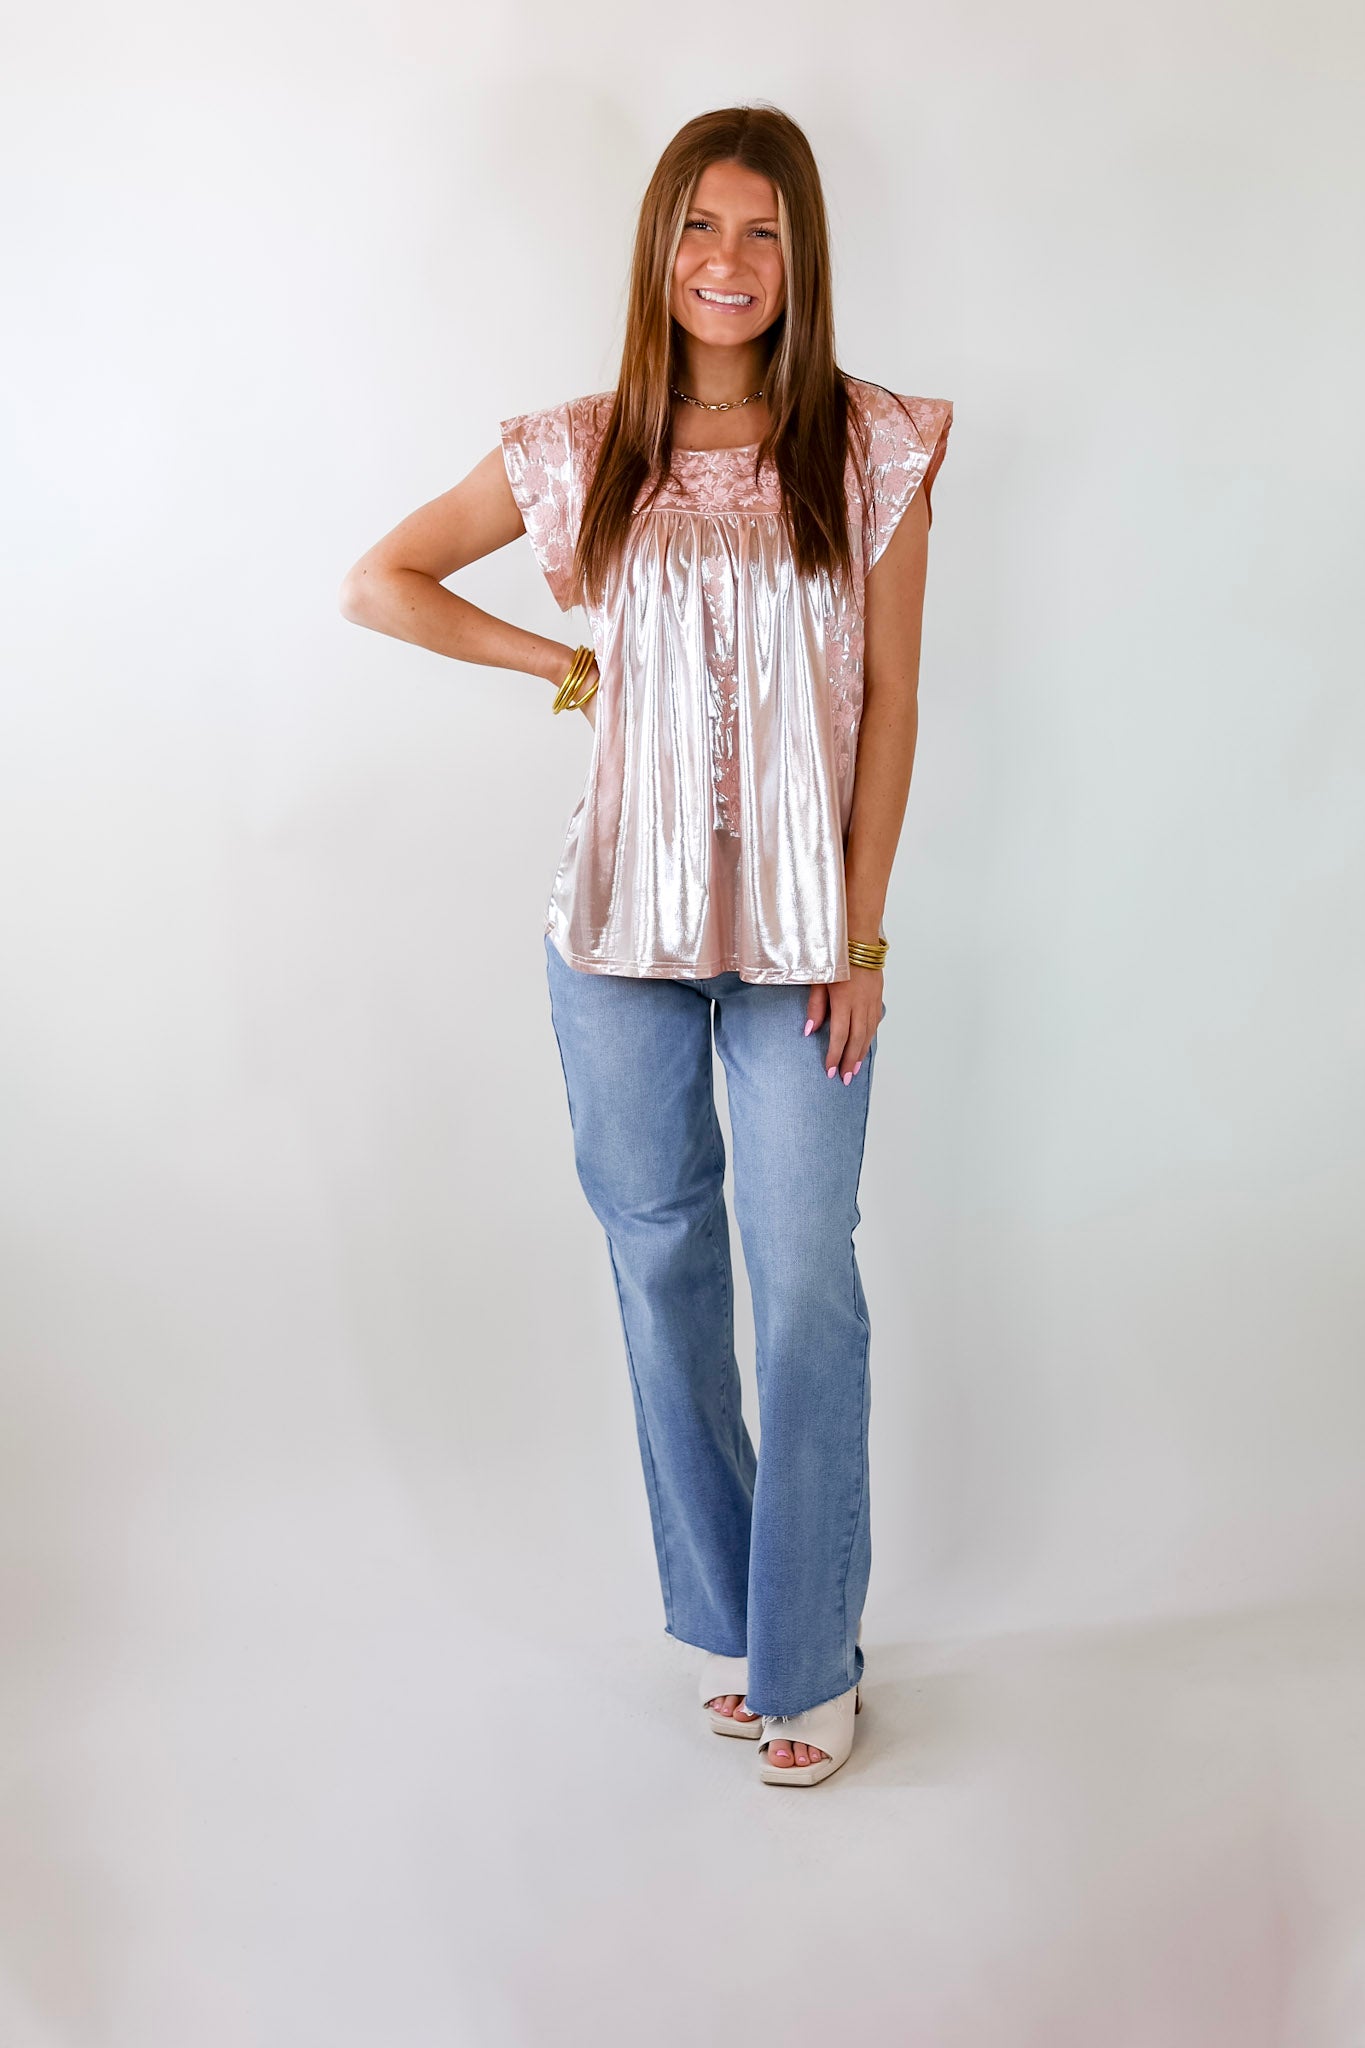 The Thrill Of It Floral Embroidered Metallic Top in Blush Pink - Giddy Up Glamour Boutique